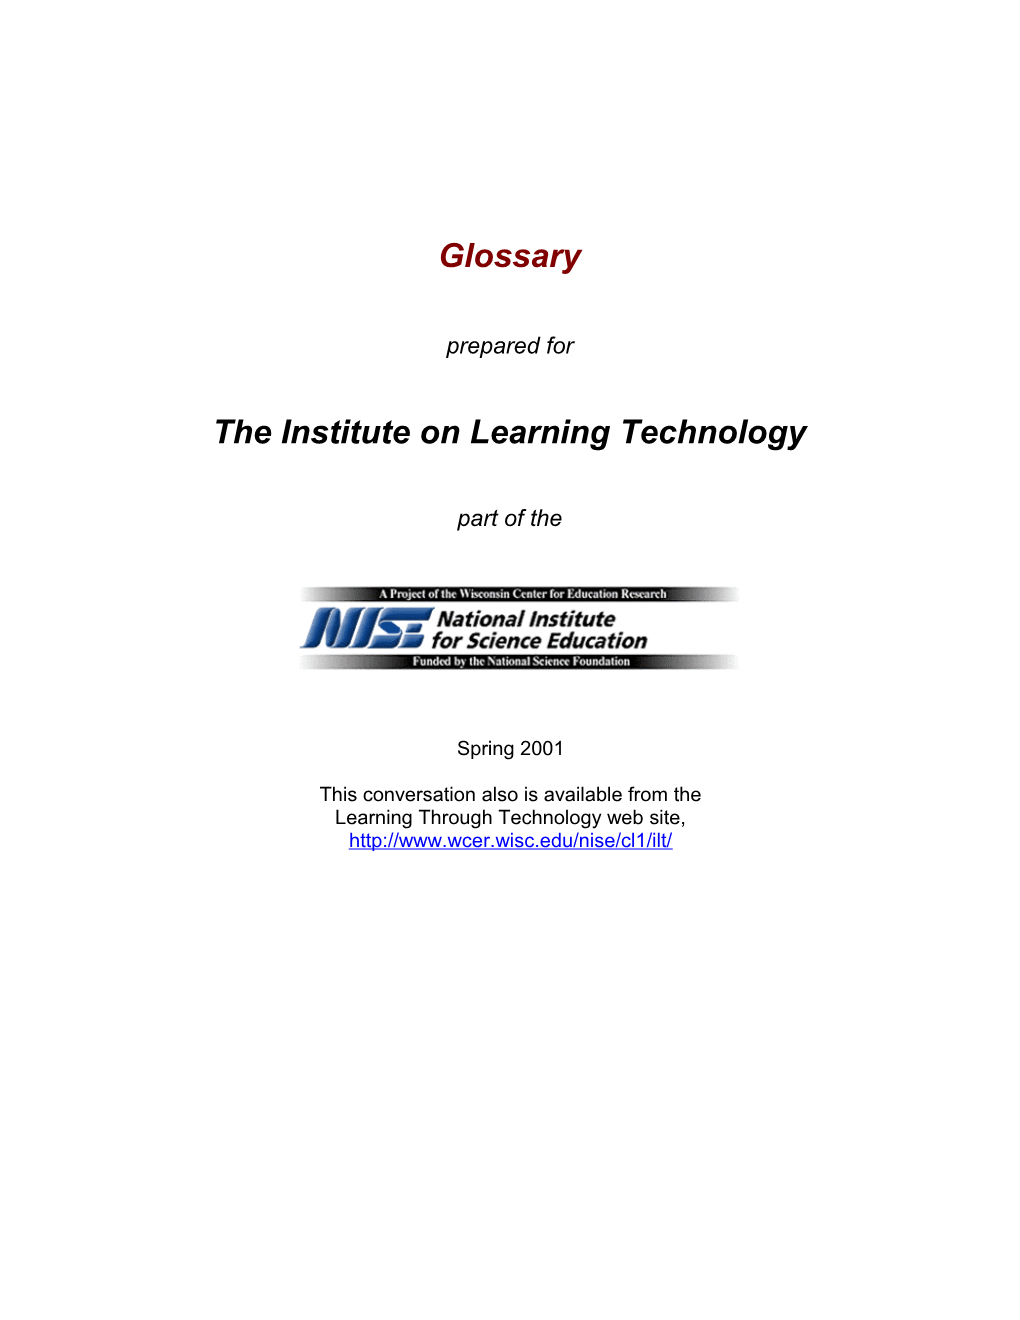 The Institute on Learning Technology